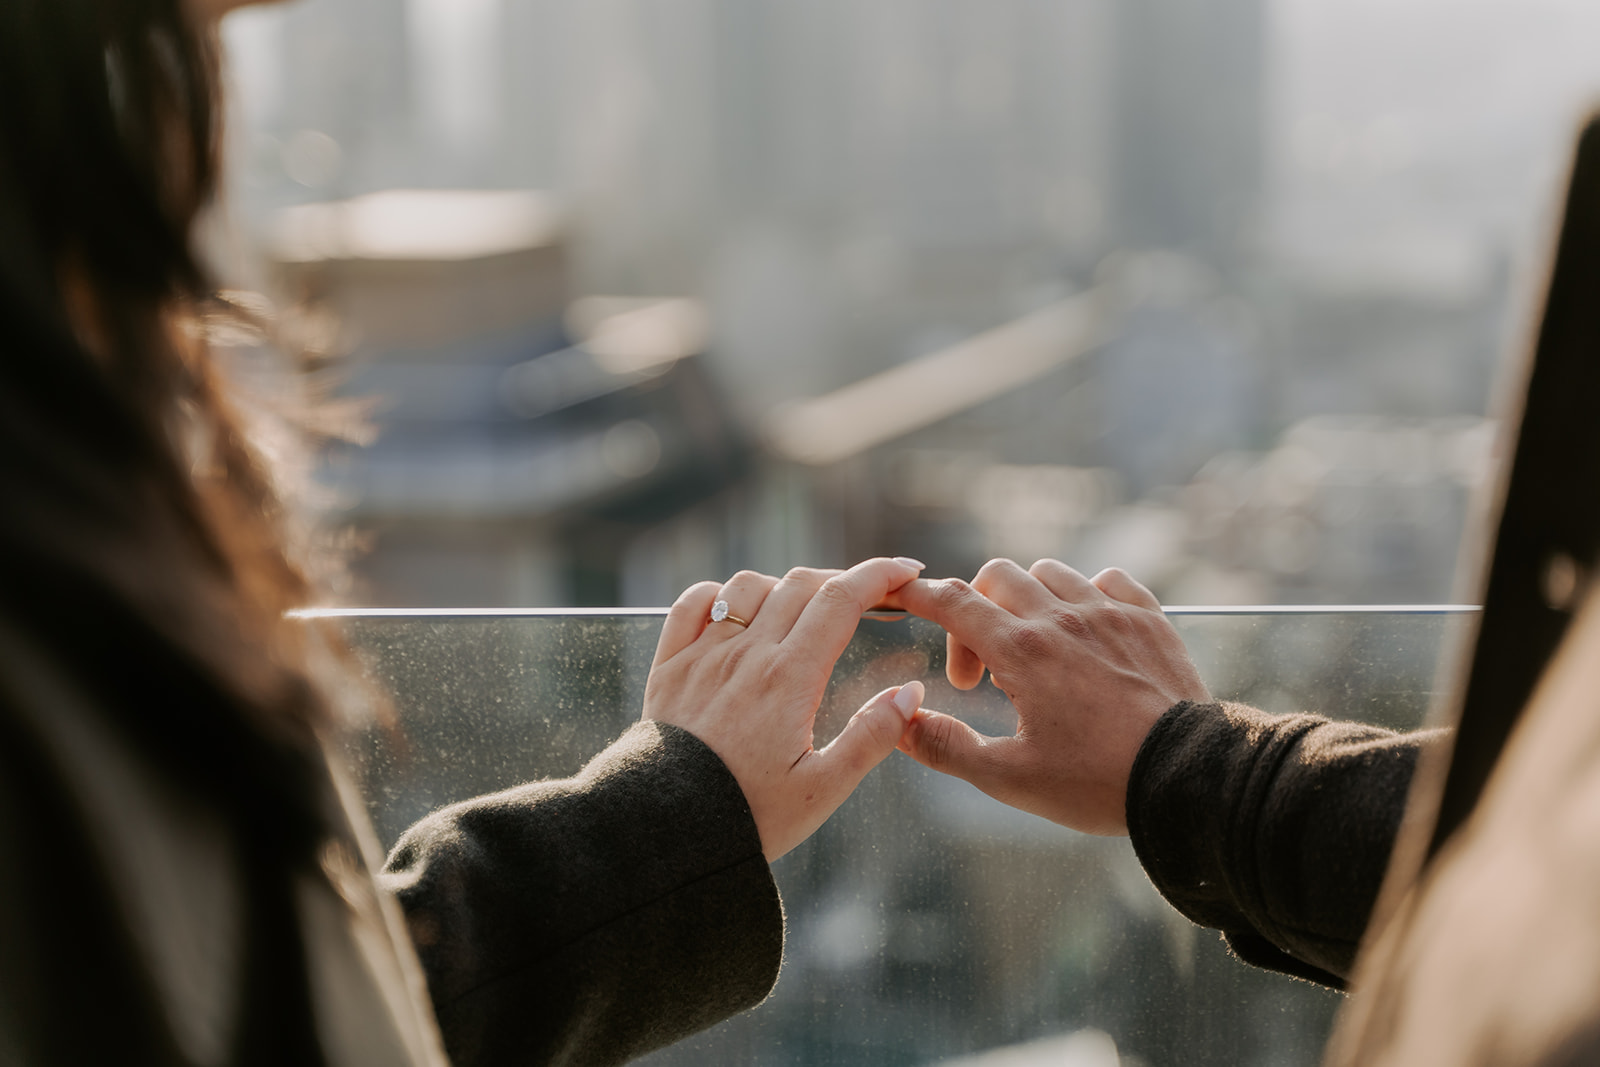 Two people holding hands, connecting with their fingers against a view of Seoul.